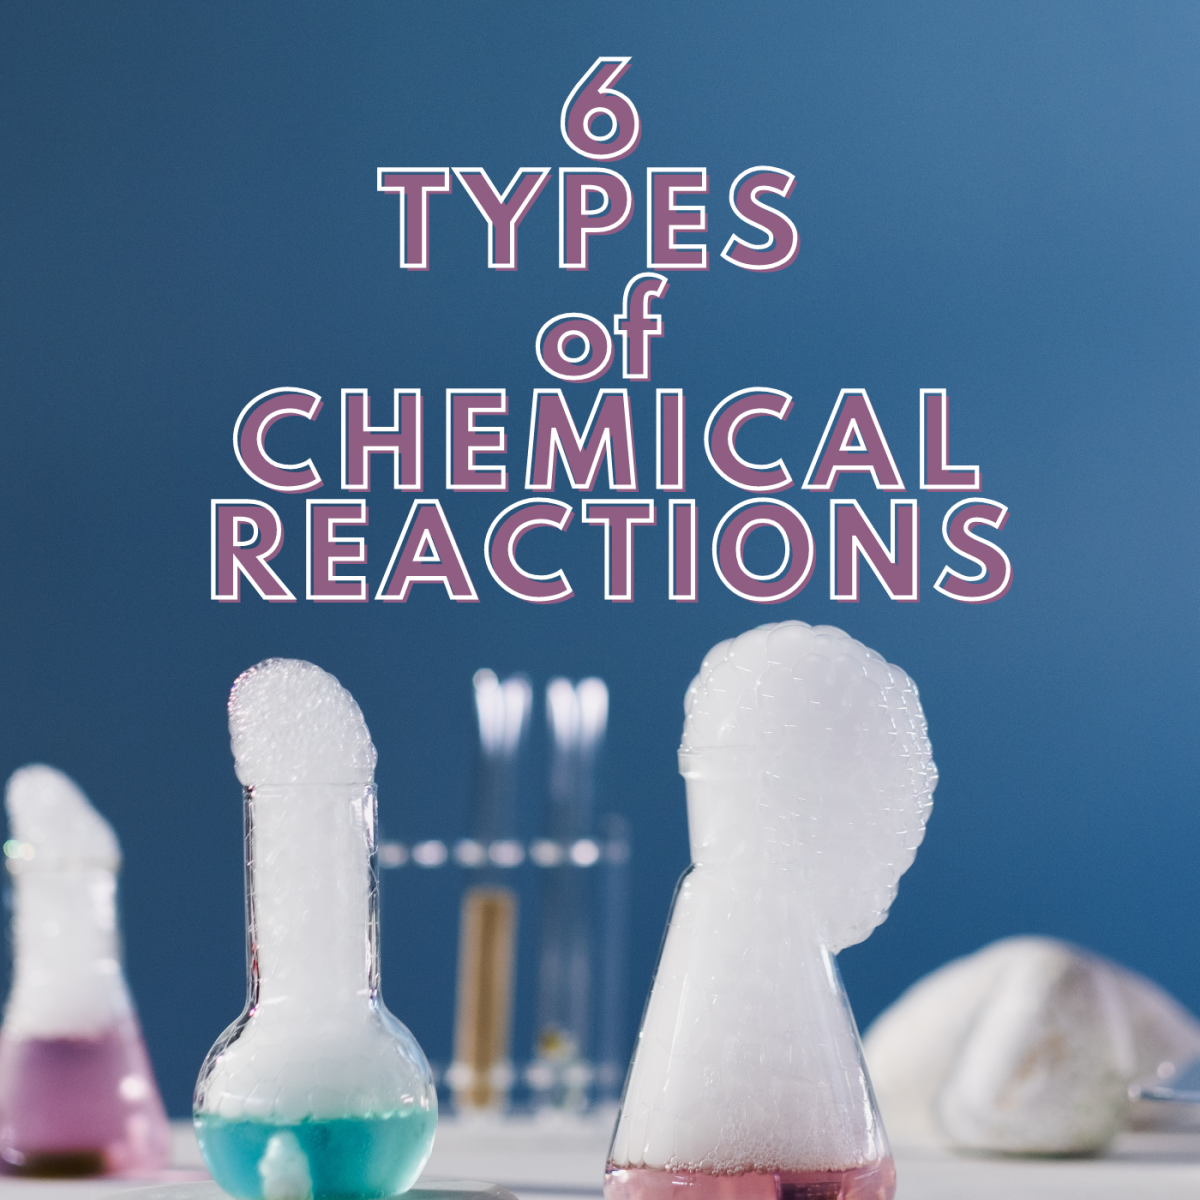 The Six Types of Chemical Reactions